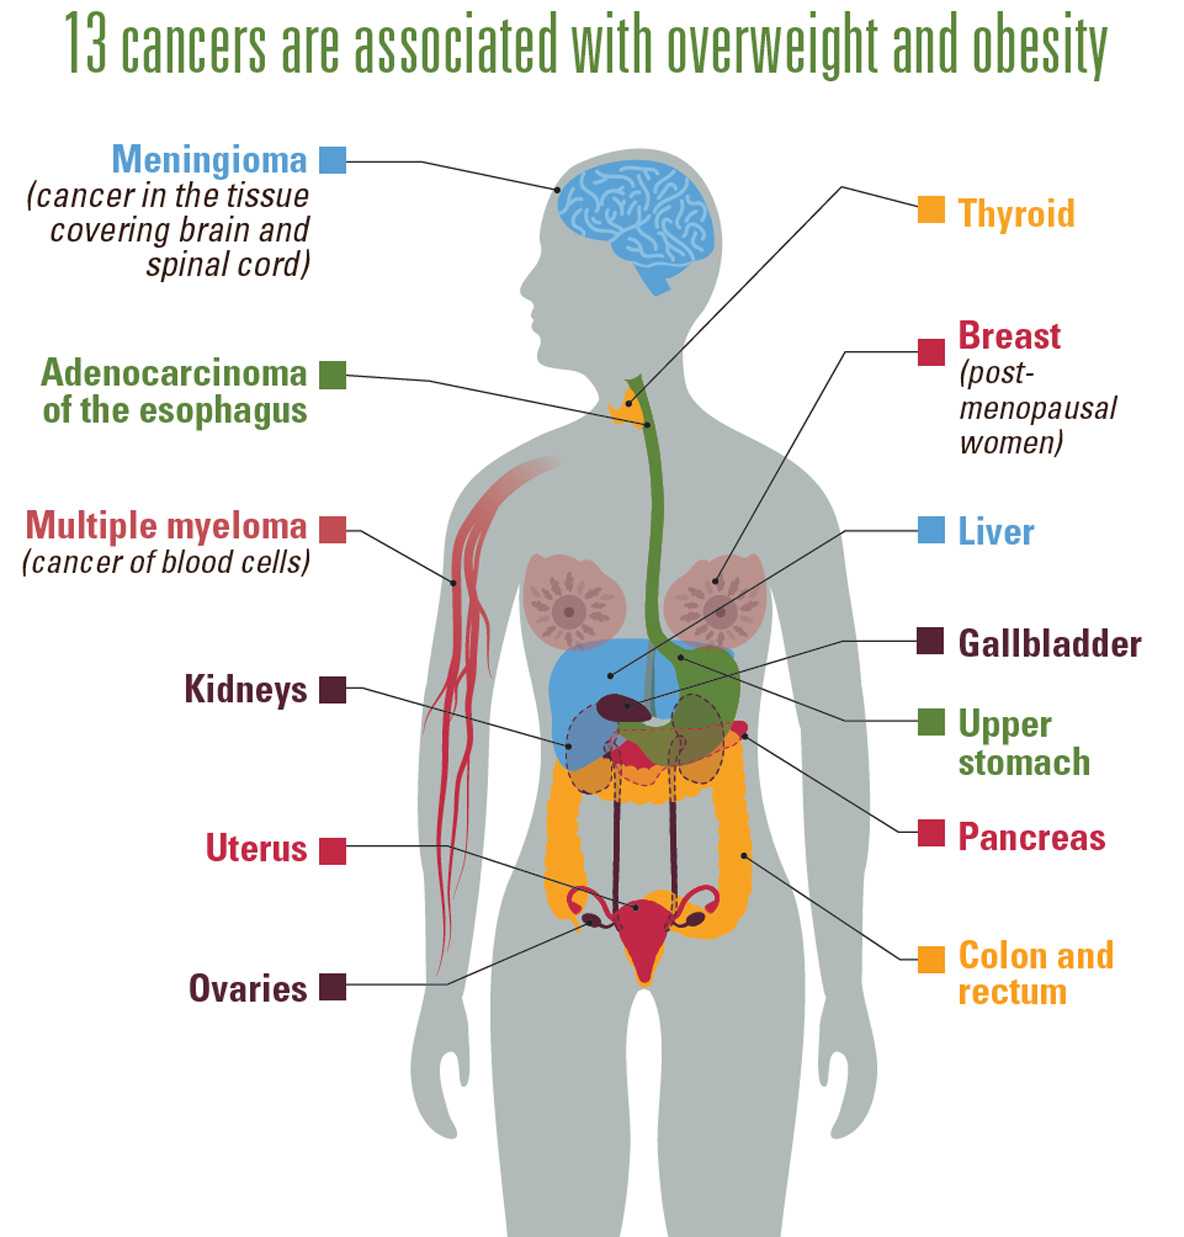 Graphic: 13 Cancers are associated with overweight and obesity